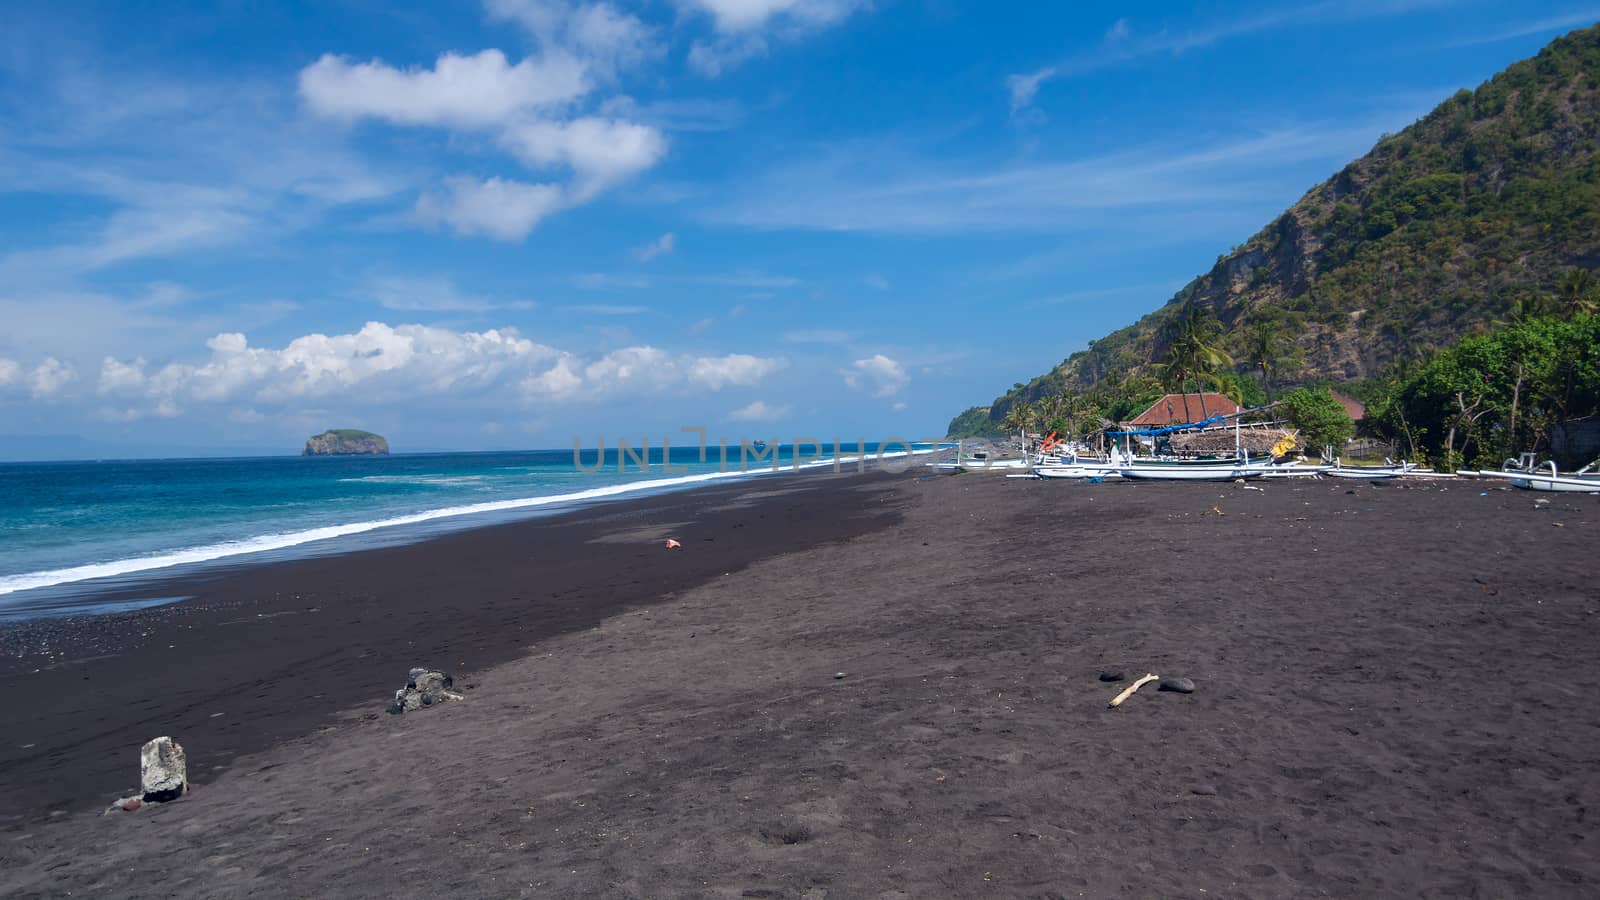 Junks on the beach of black sand on the island of Bali in Indonesia. Summer sunny day.